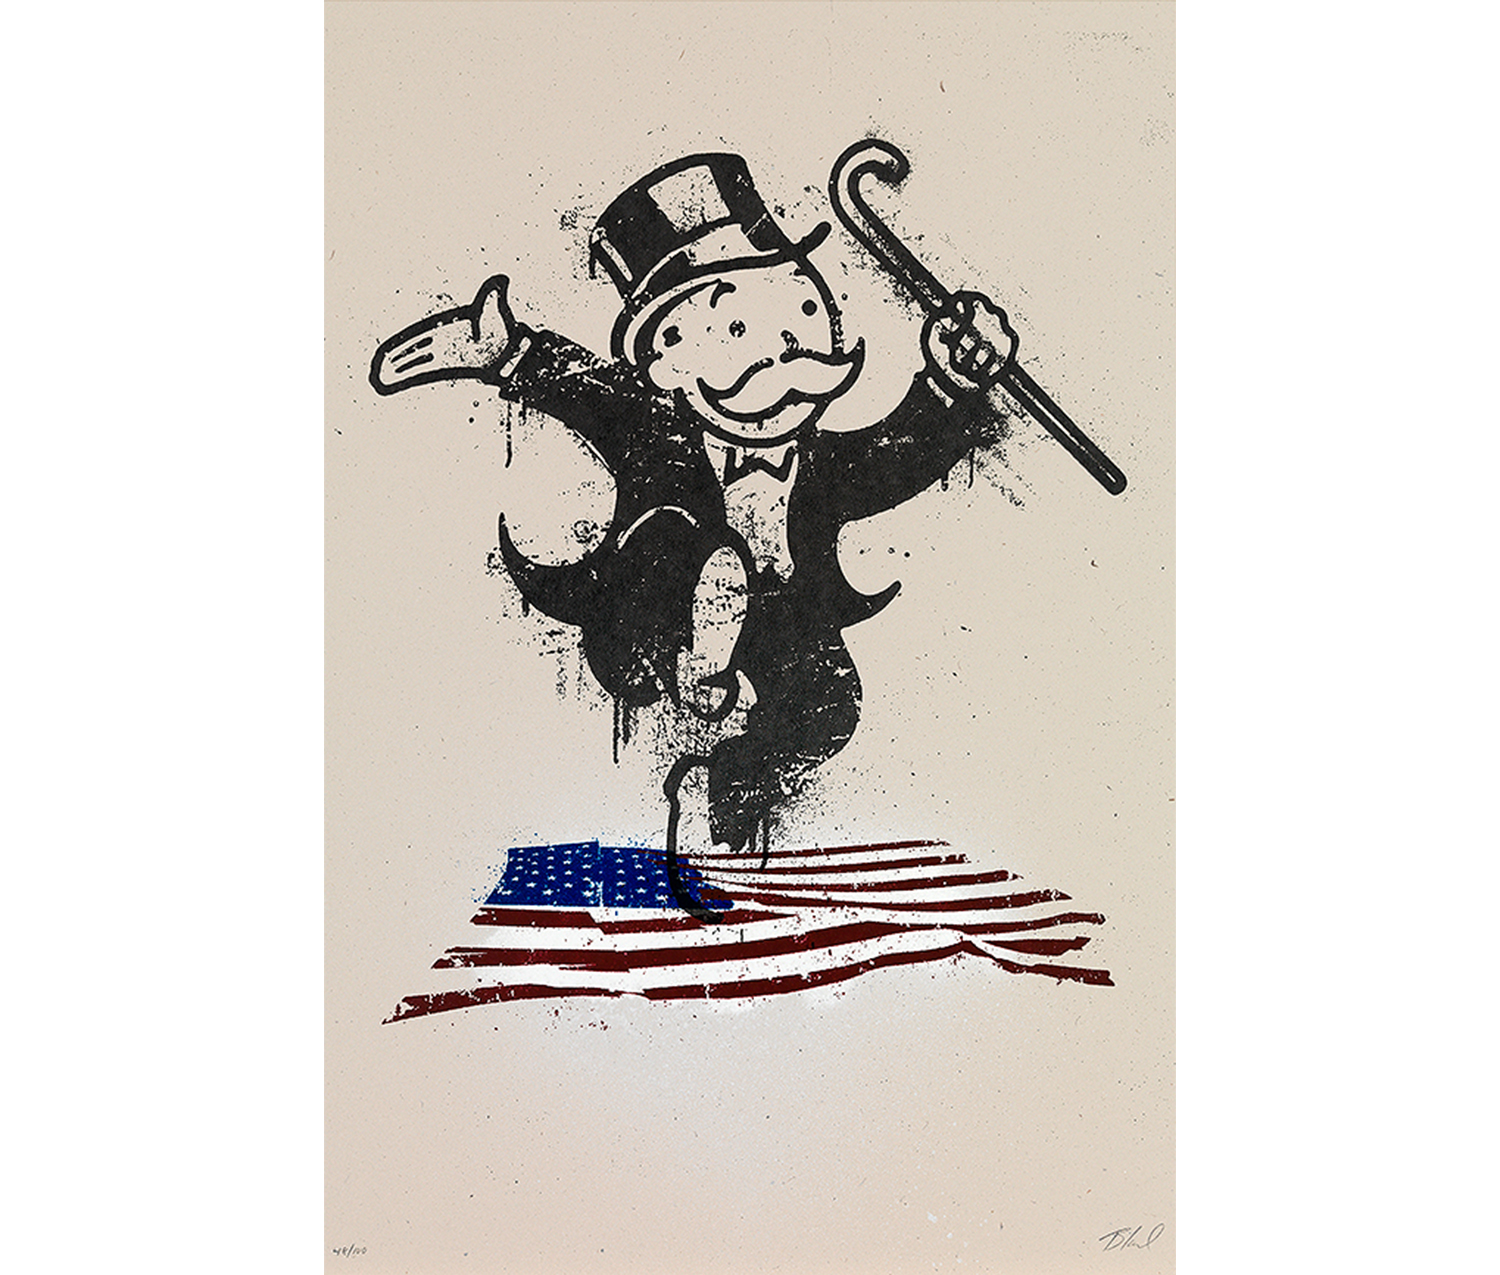 Monopoly figure in top hat with cane dancing in black on the American flag in red and blue